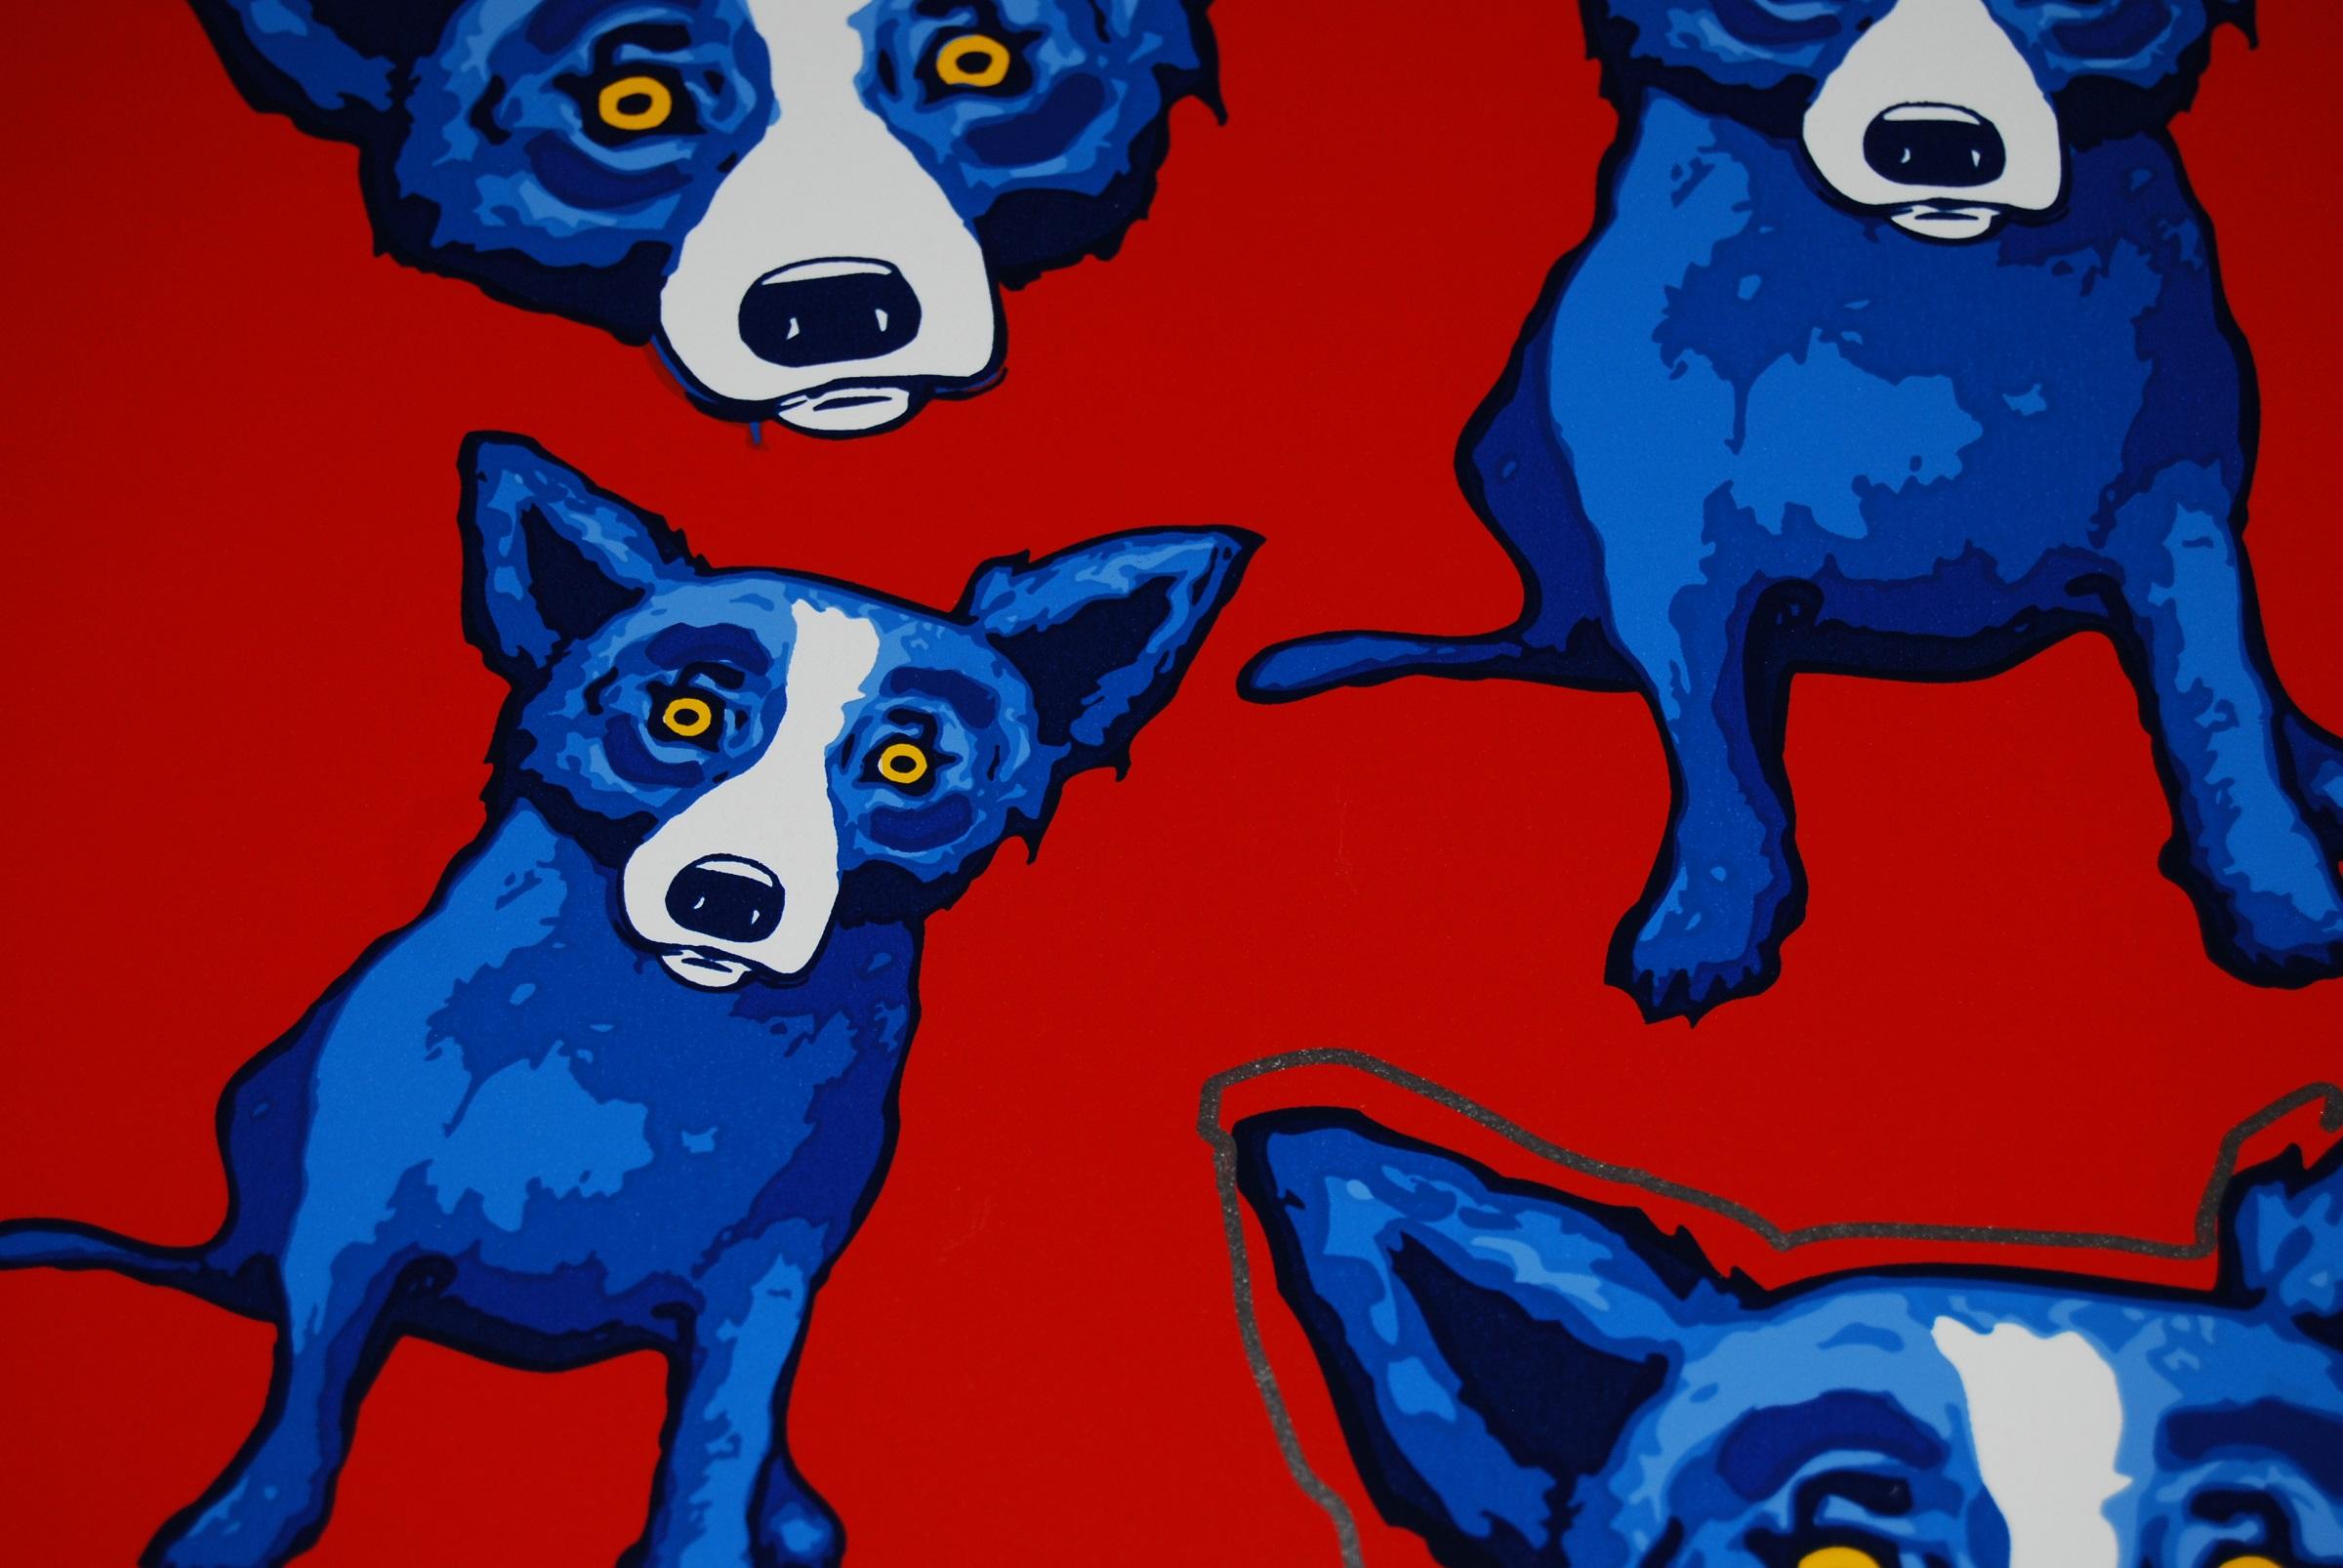 Original Group Therapy Red - Remarqued Signed Silkscreen Blue Dog Print 1